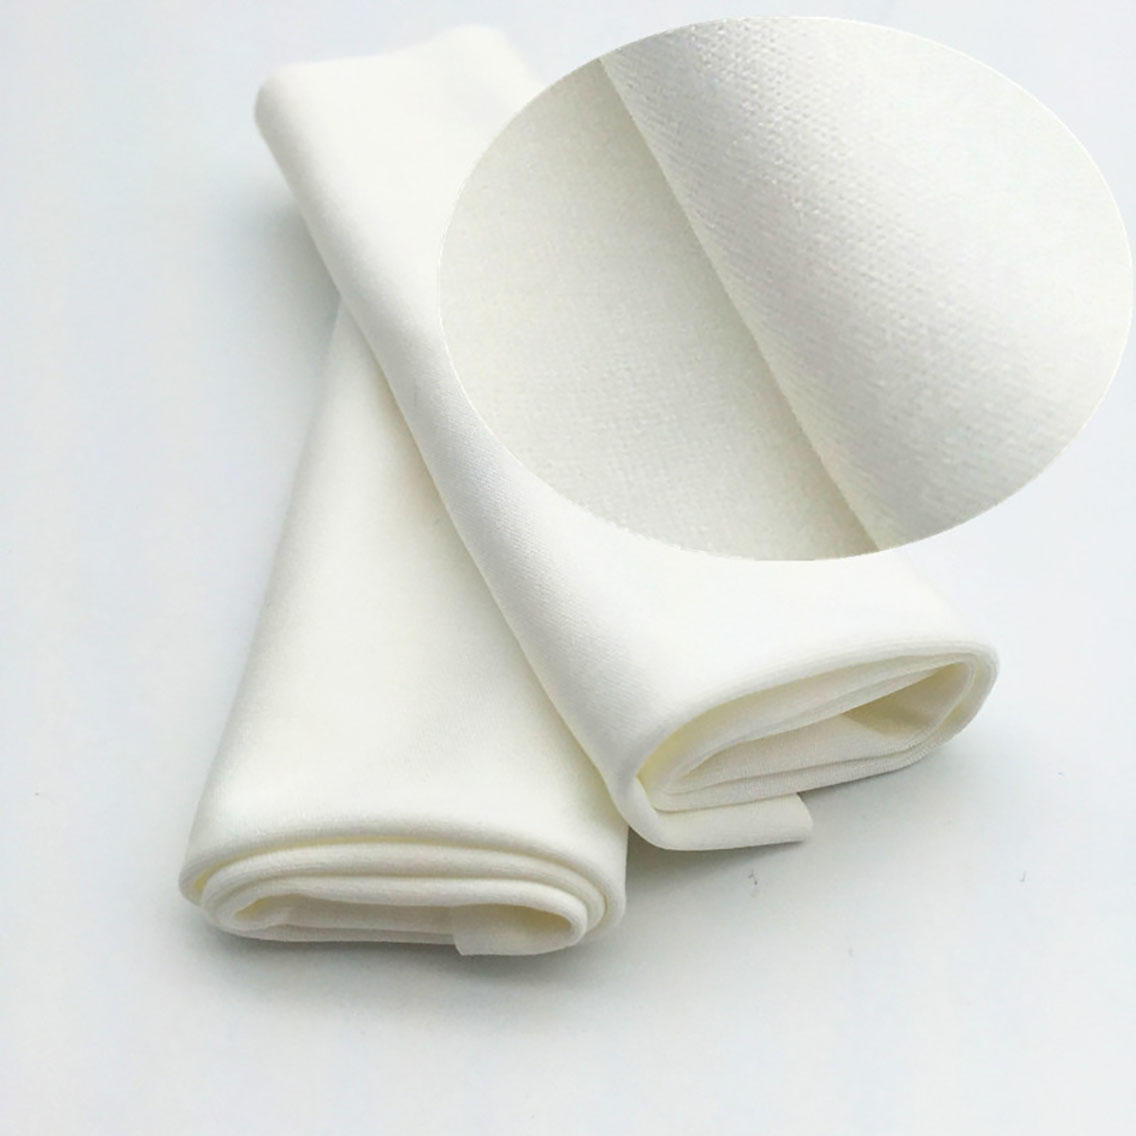 Cleanmo 30% nylon lens wipes supplier for medical device products-2